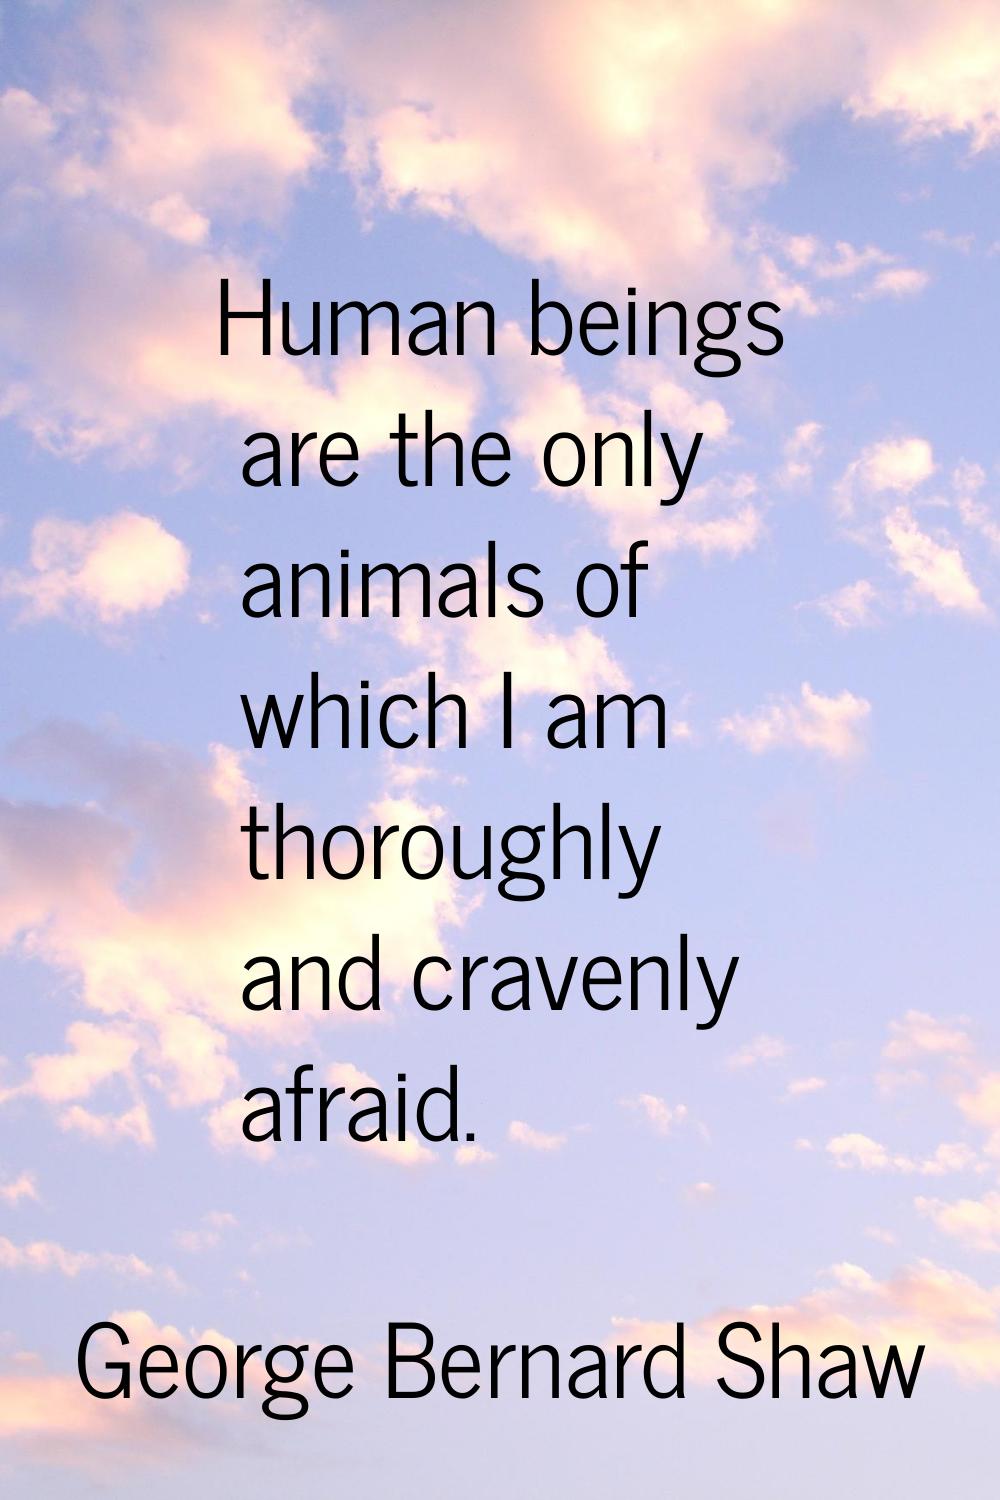 Human beings are the only animals of which I am thoroughly and cravenly afraid.